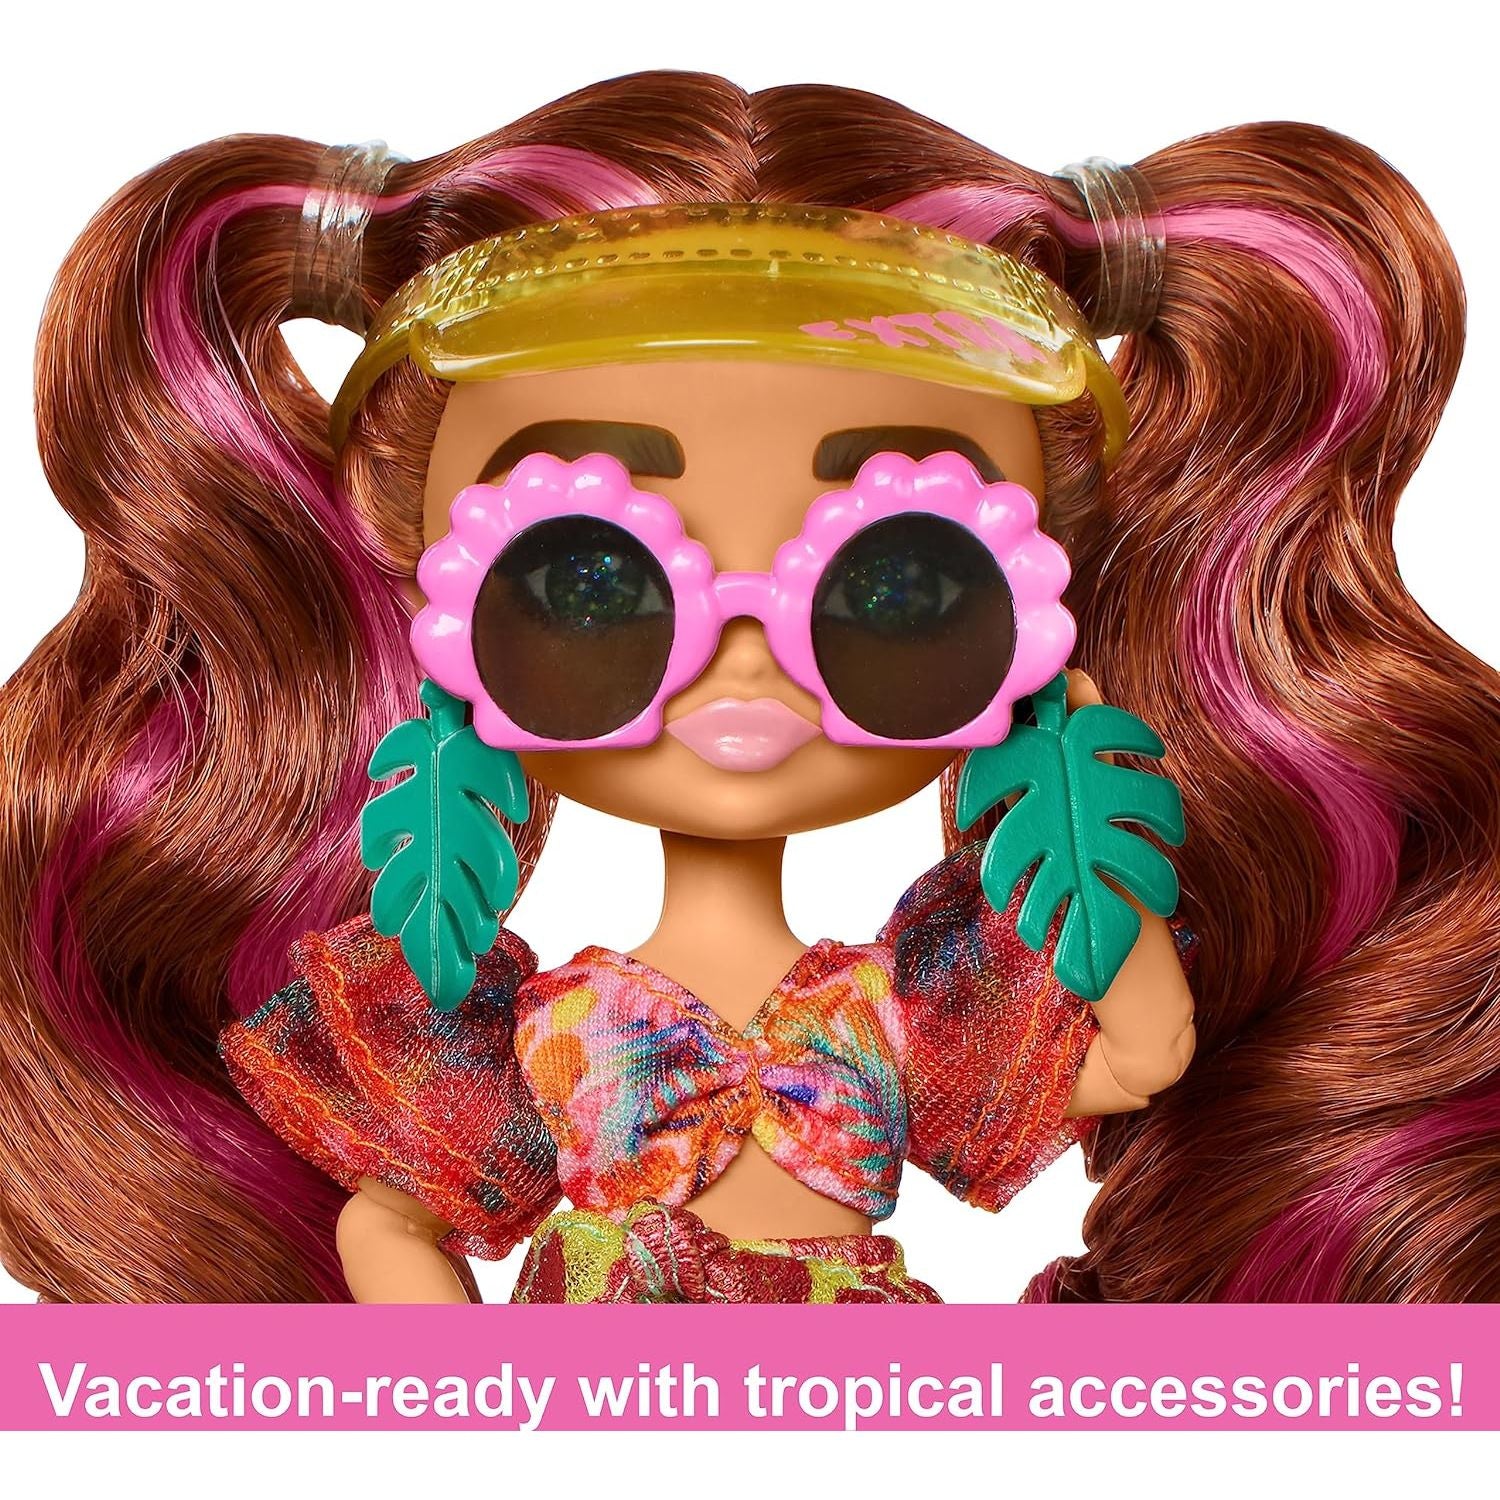 Barbie Extra Minis Travel Doll with Beach Fashion, Barbie Extra Fly Small Doll, Tropical Outfit with Accessories